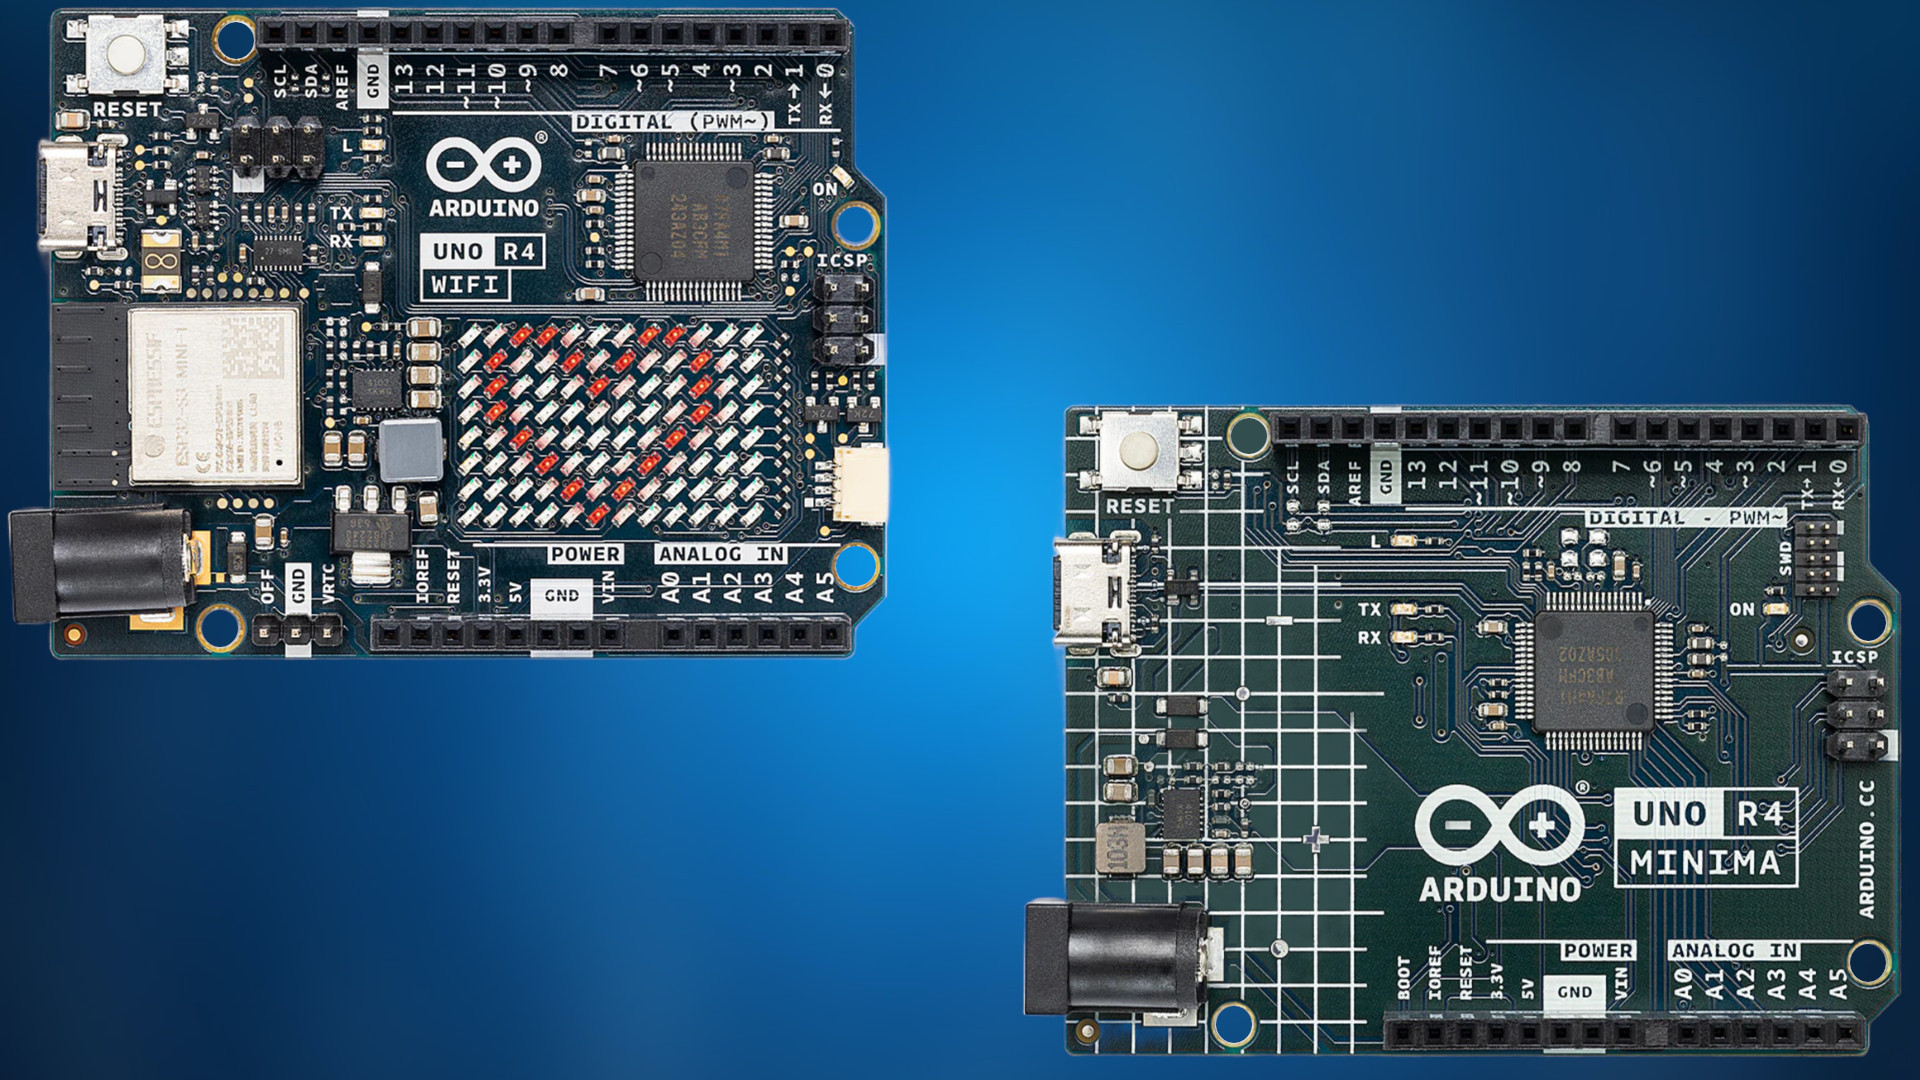 Arduino's Uno R4 Is Available Now in Wi-Fi & 'Minima' Versions